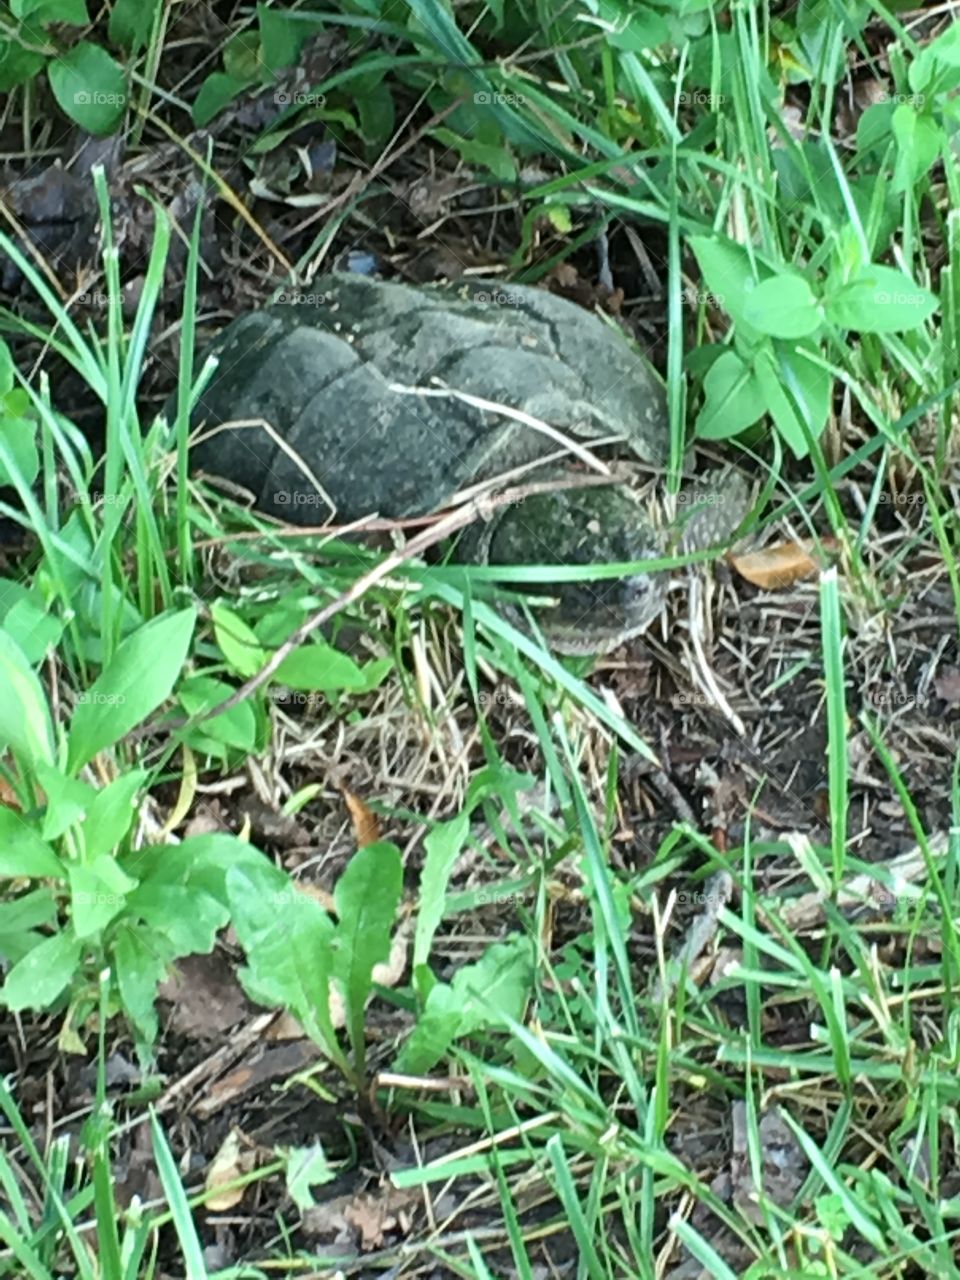 Turtle on the trail